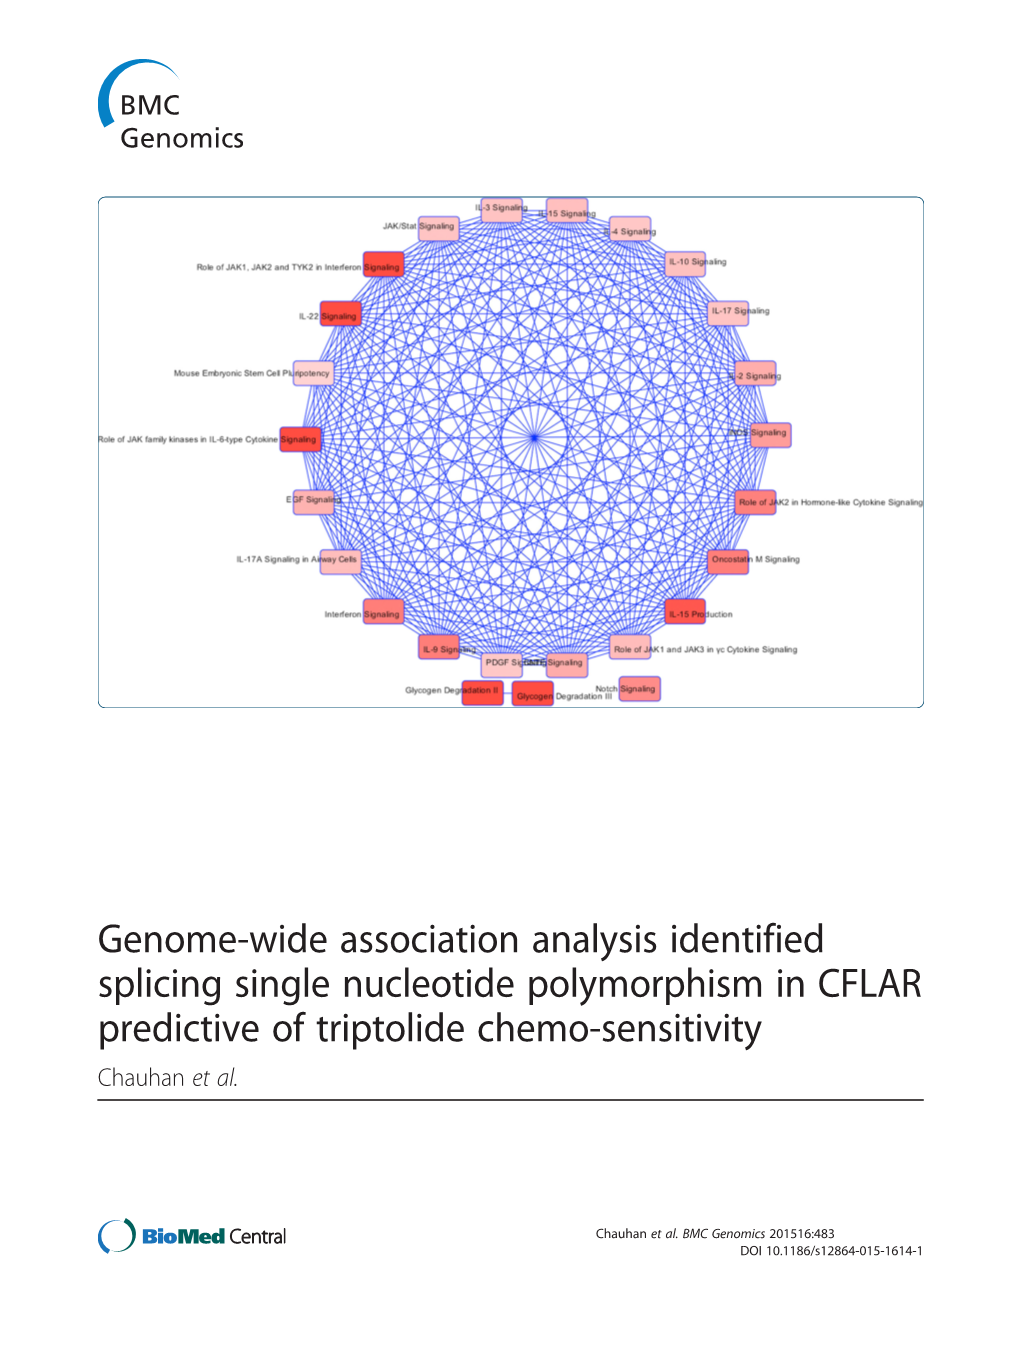 Genome-Wide Association Analysis Identified Splicing Single Nucleotide Polymorphism in CFLAR Predictive of Triptolide Chemo-Sensitivity Chauhan Et Al